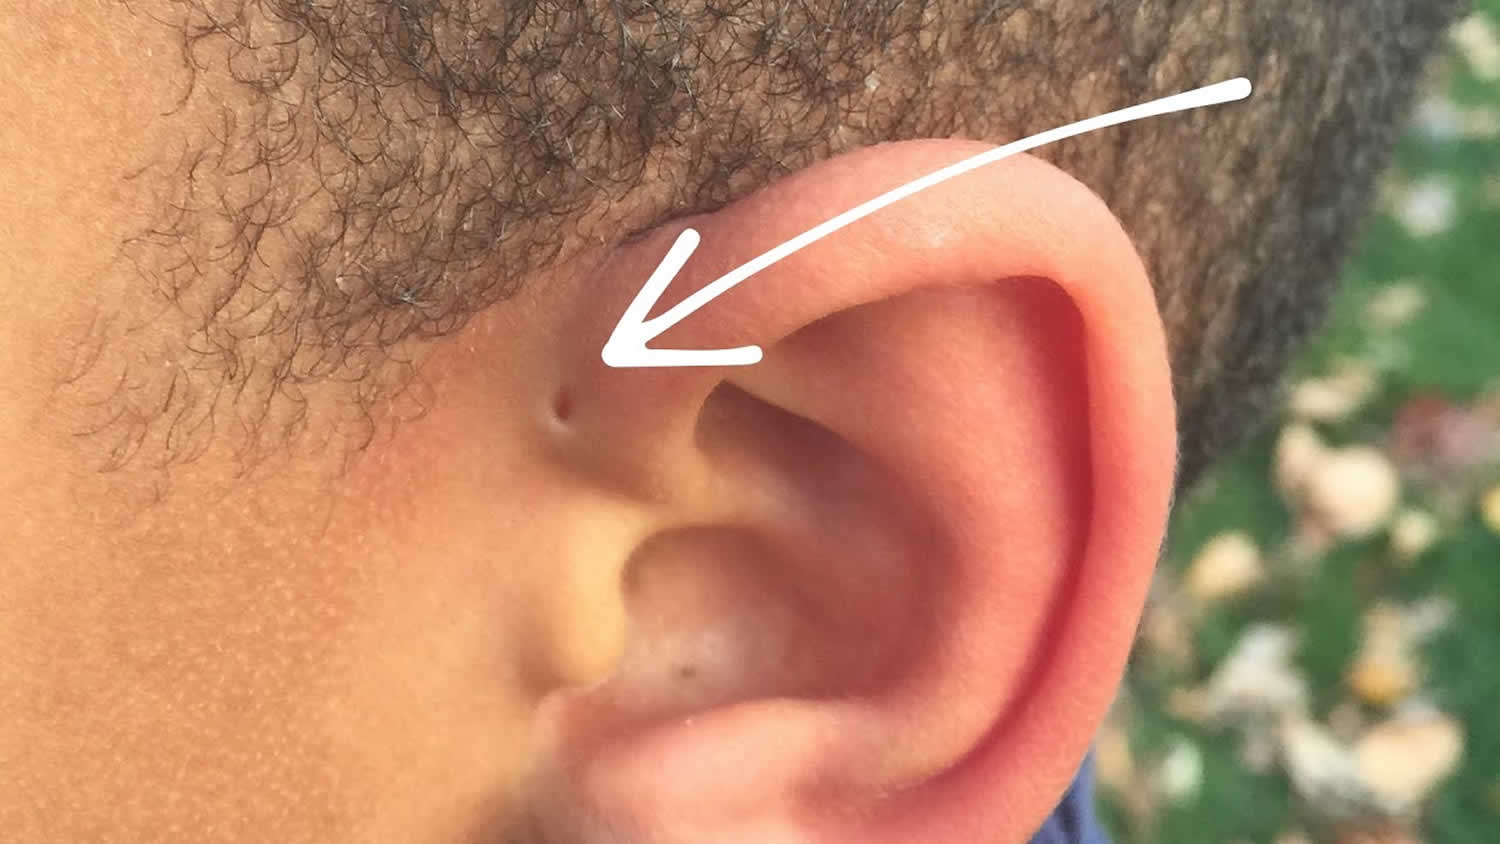 Symptoms Piercing Infection: 4 Ways to HEAL FAST pop an infected ear pierci...